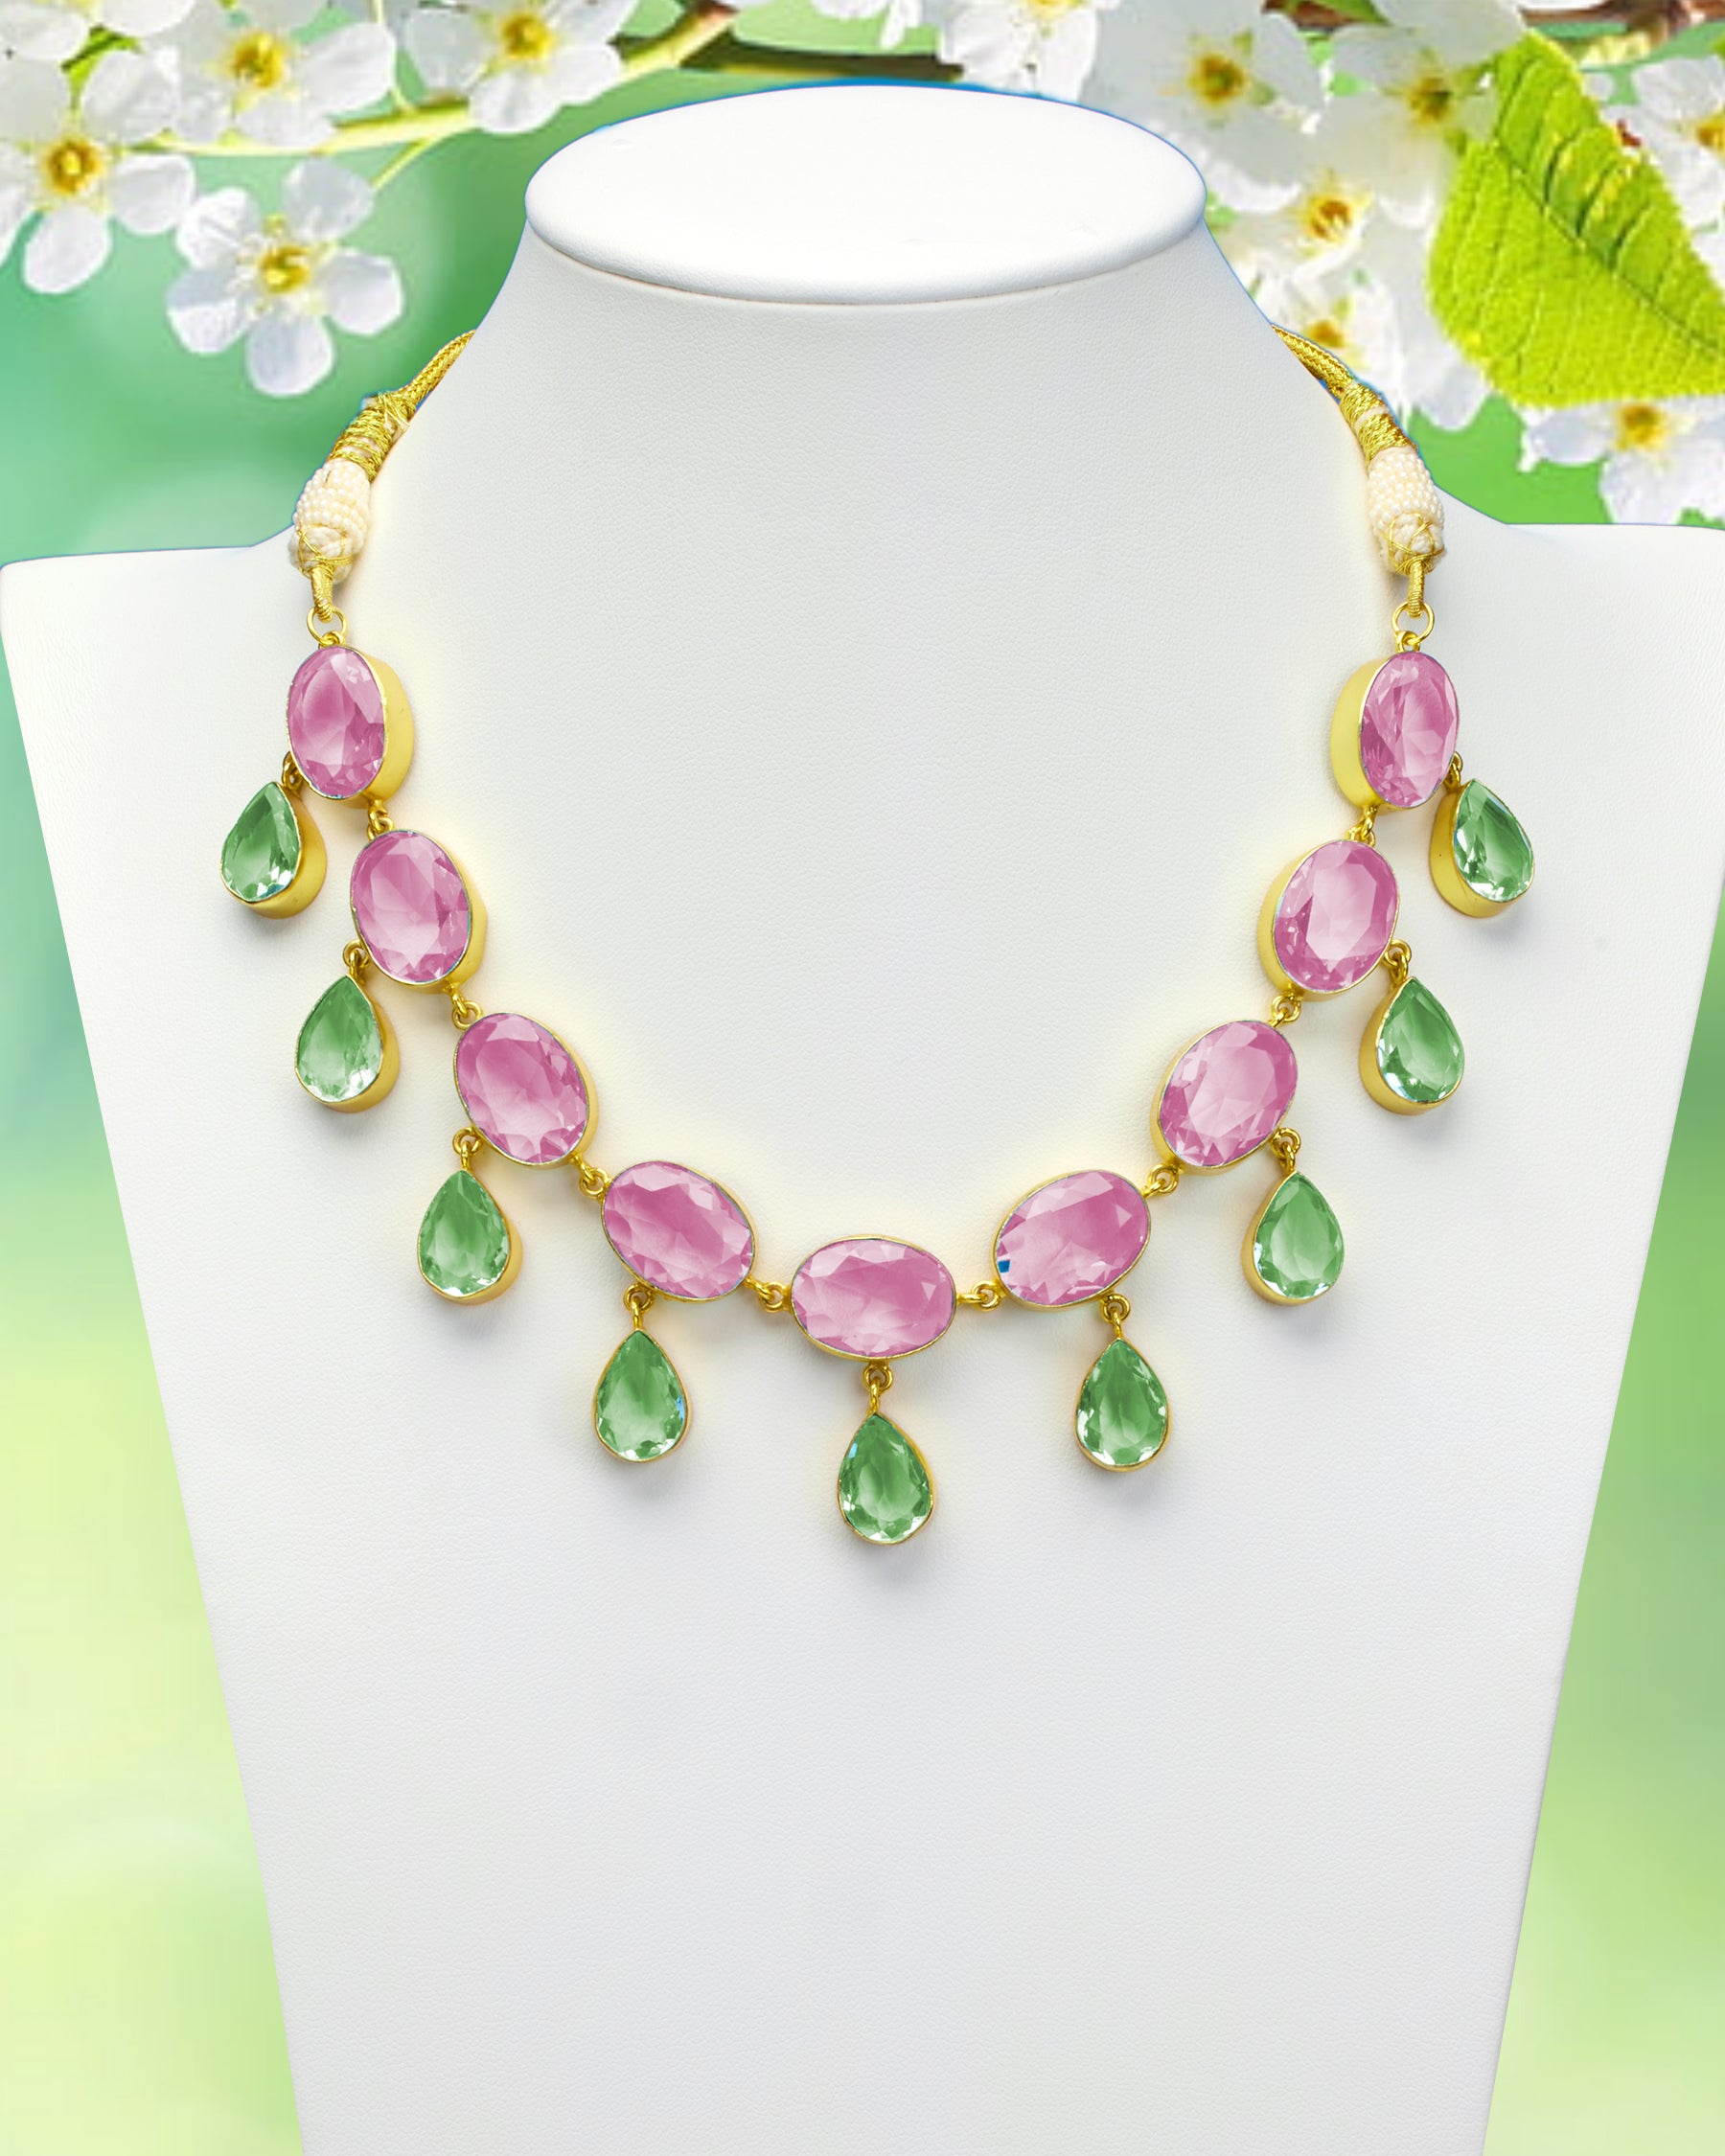 Chiara Dewdrop Necklace in Blush Pink and Mint Green